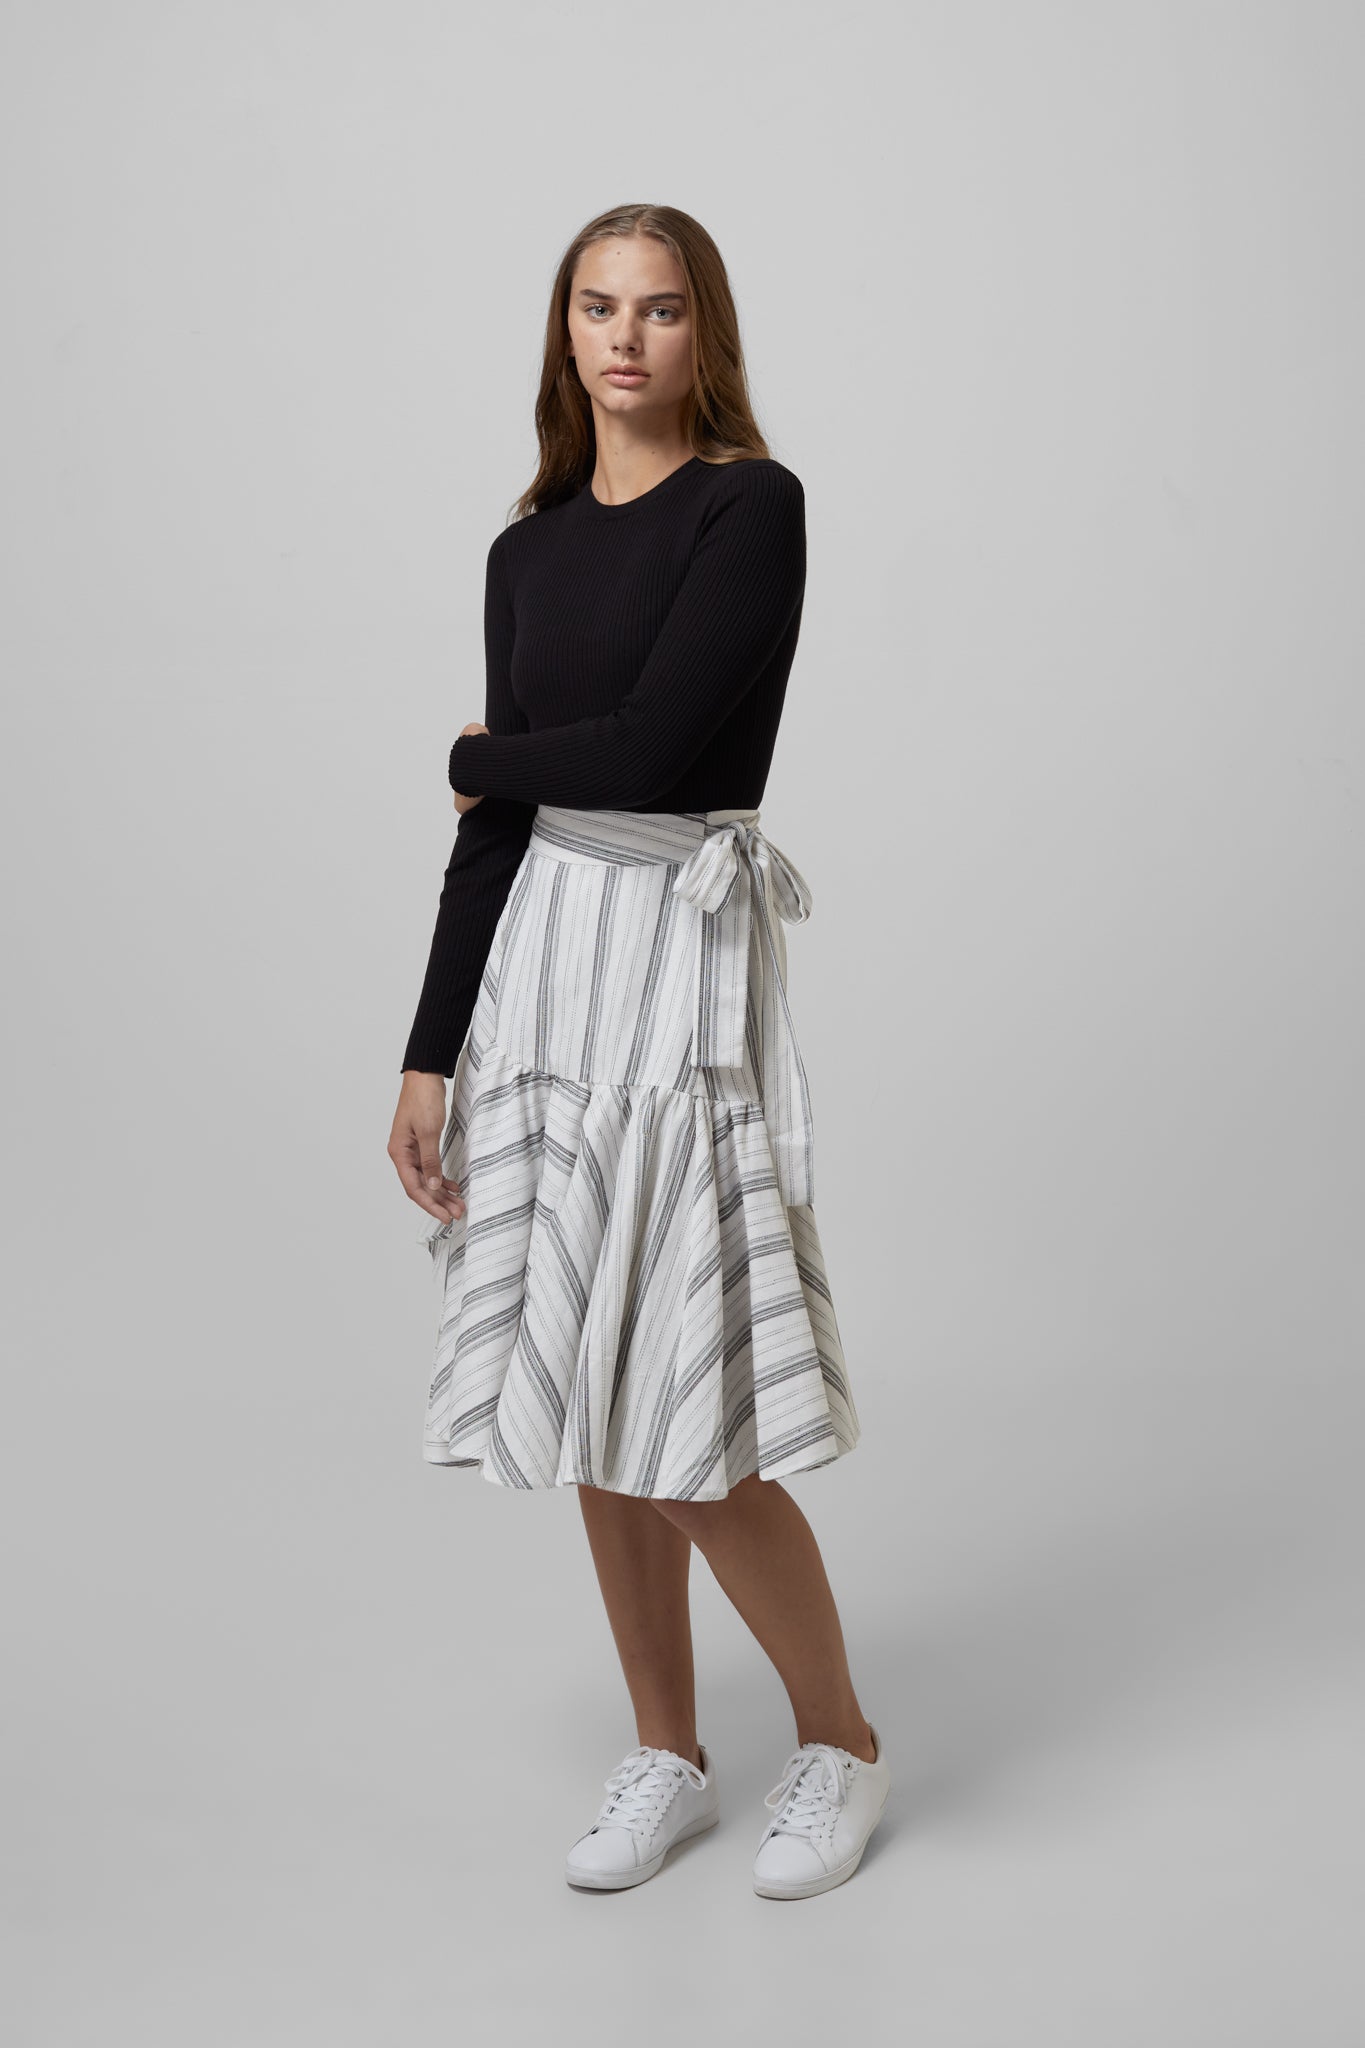 Lillian Skirt in Black and White #7912 FINAL SALE